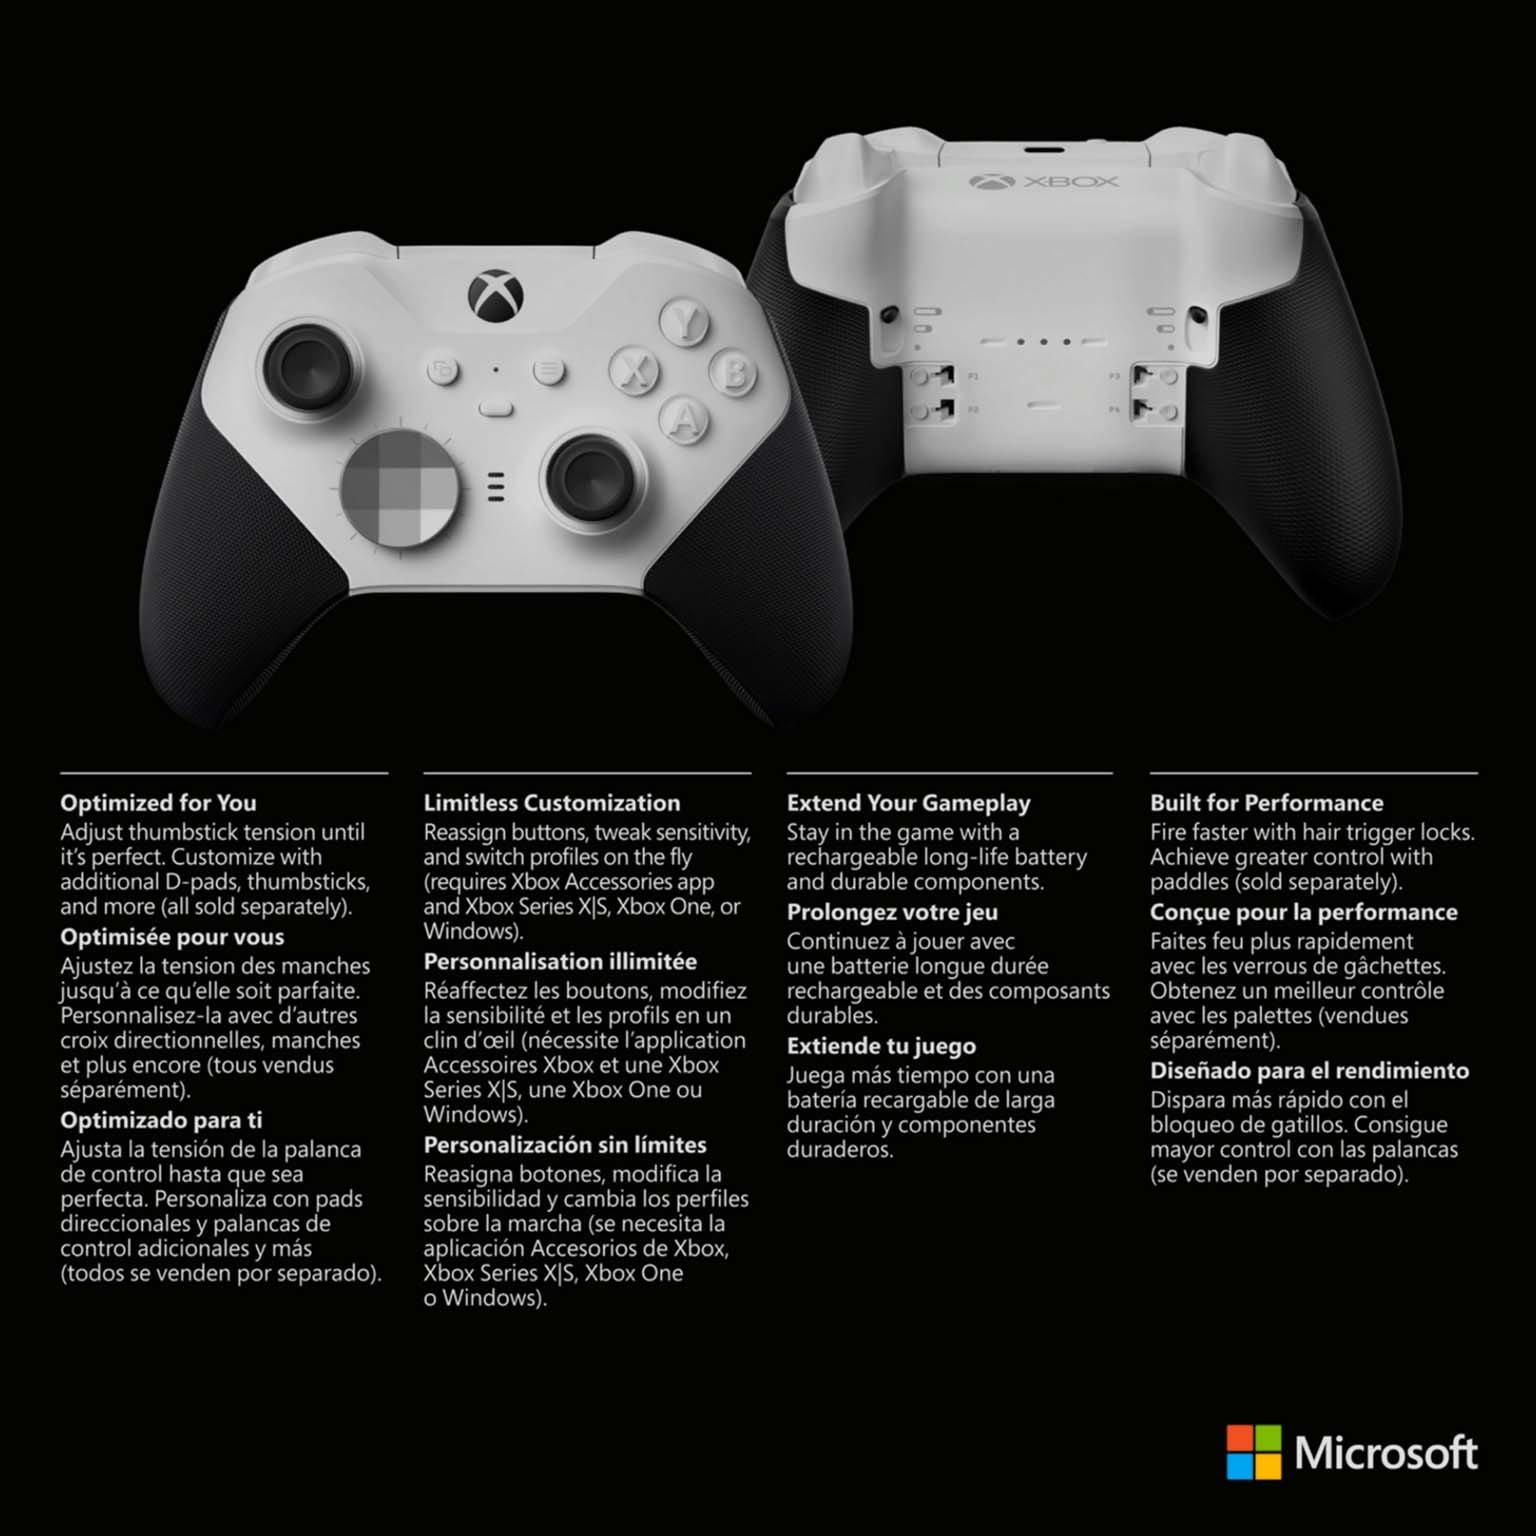 How to Change the Xbox Button Color on the Elite Series 2 Controller